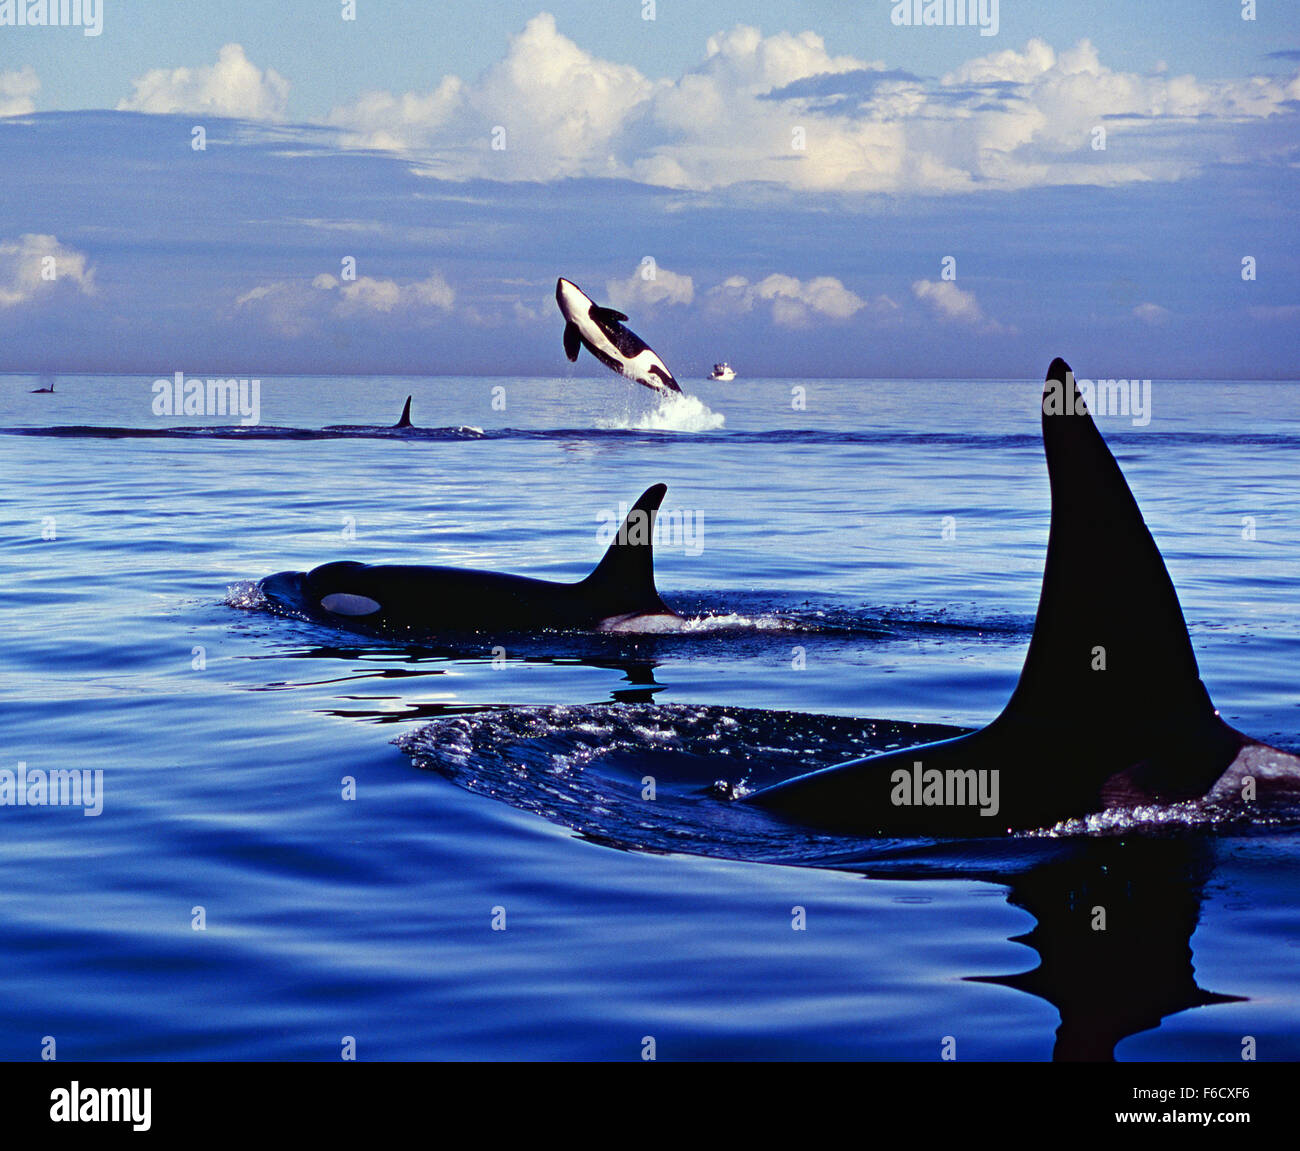 Orca whales (Killer Whales) migrate down the Pacific coast. Stock Photo